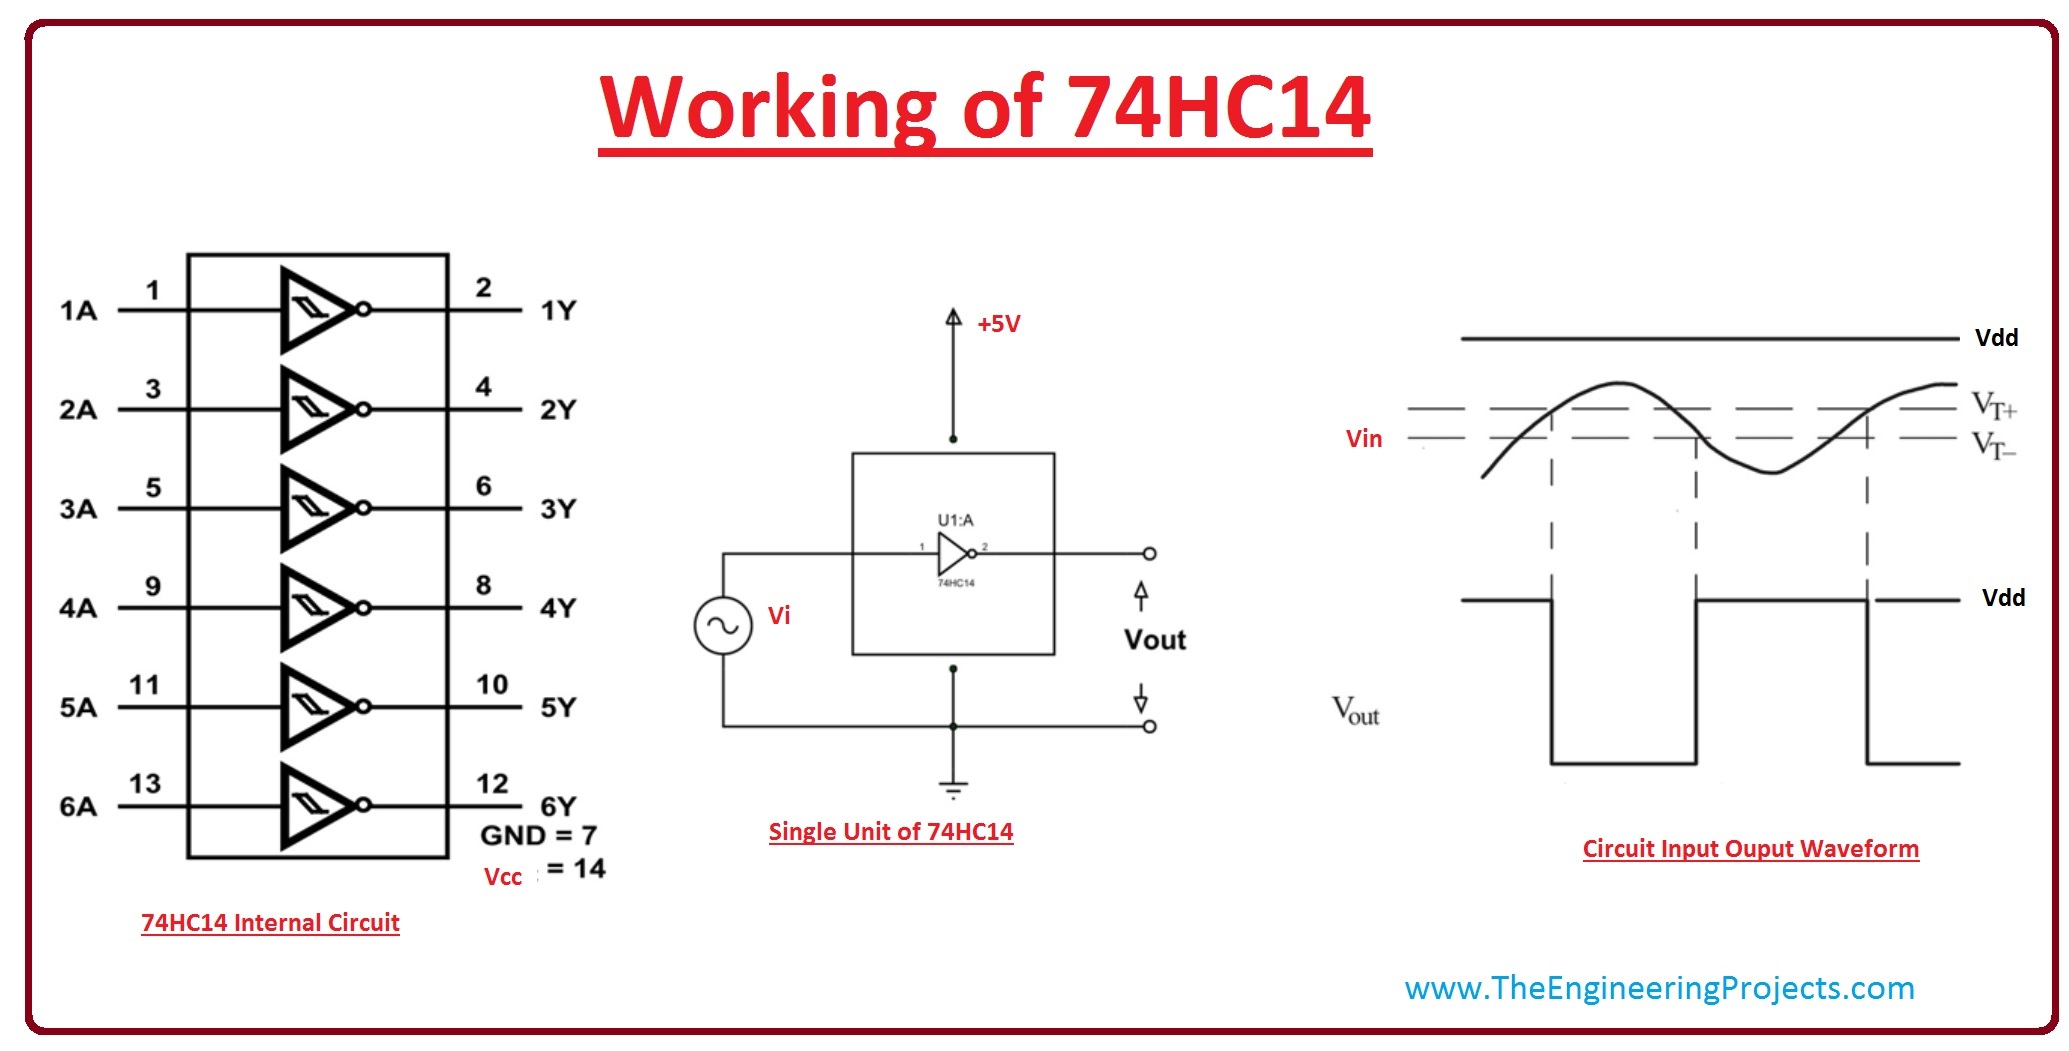 introduction to 74HC14, 74HC14 pinout, 74HC14 working, 74HC14 features, 74HC14 switching time, 74HC14 applications